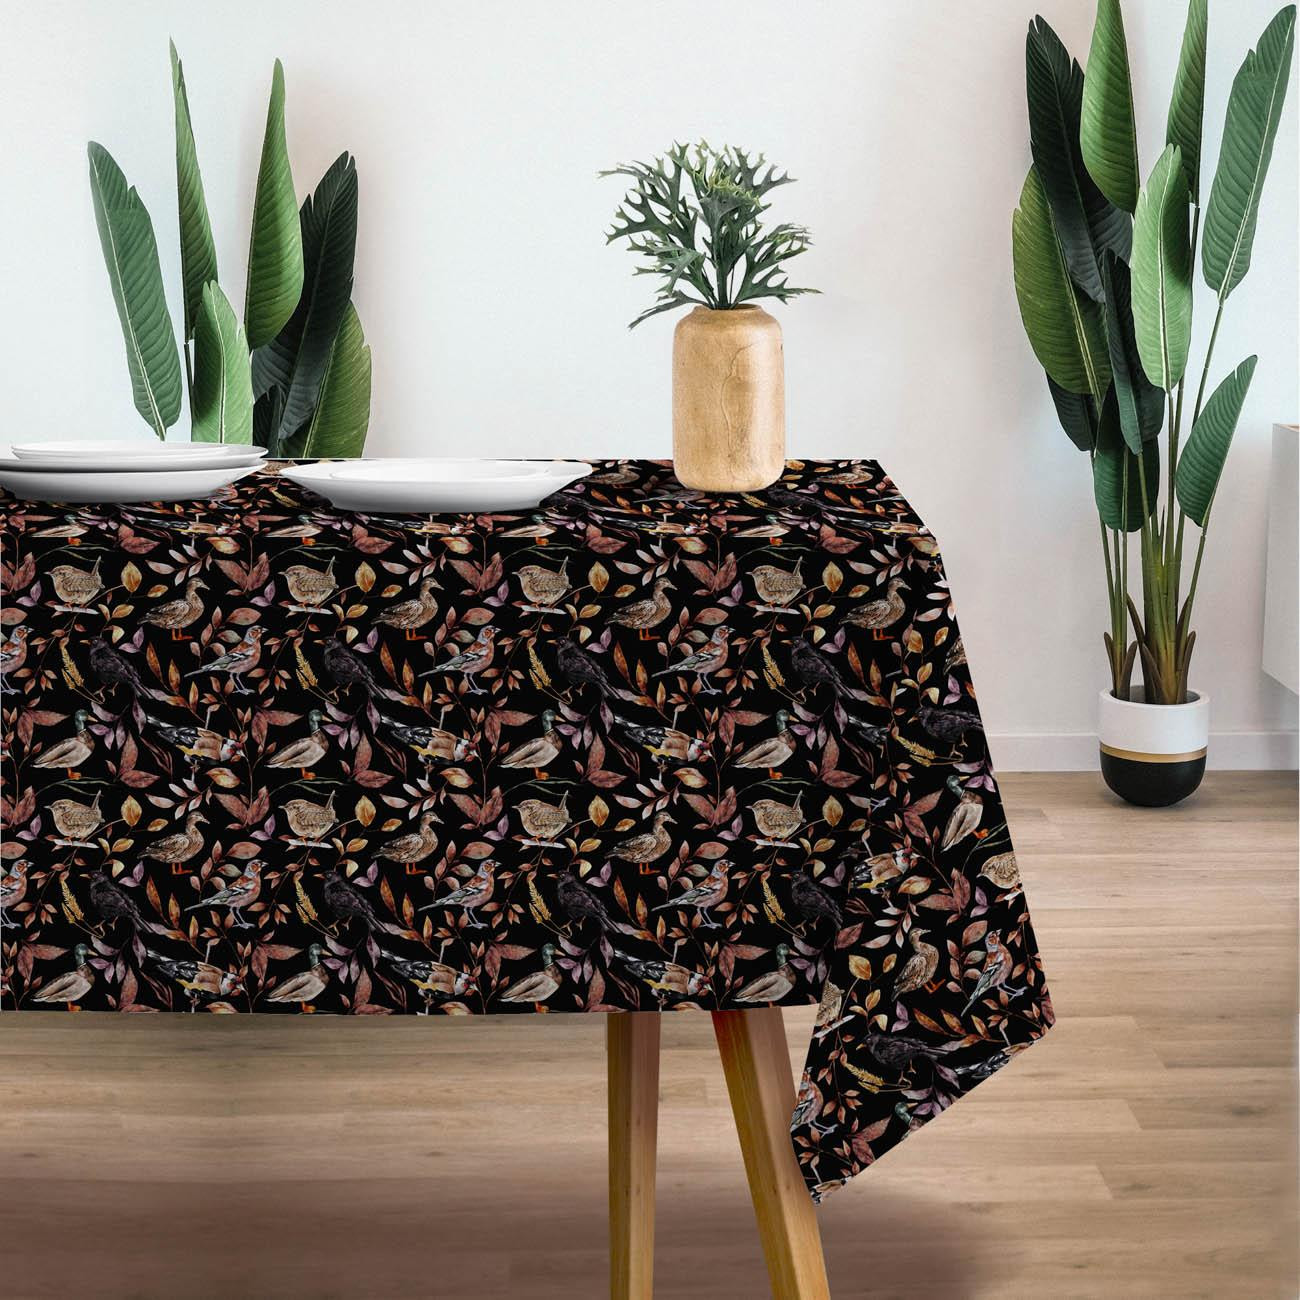 BIRDS PAT. 2 / BLACK (COLORFUL AUTUMN) - Woven Fabric for tablecloths